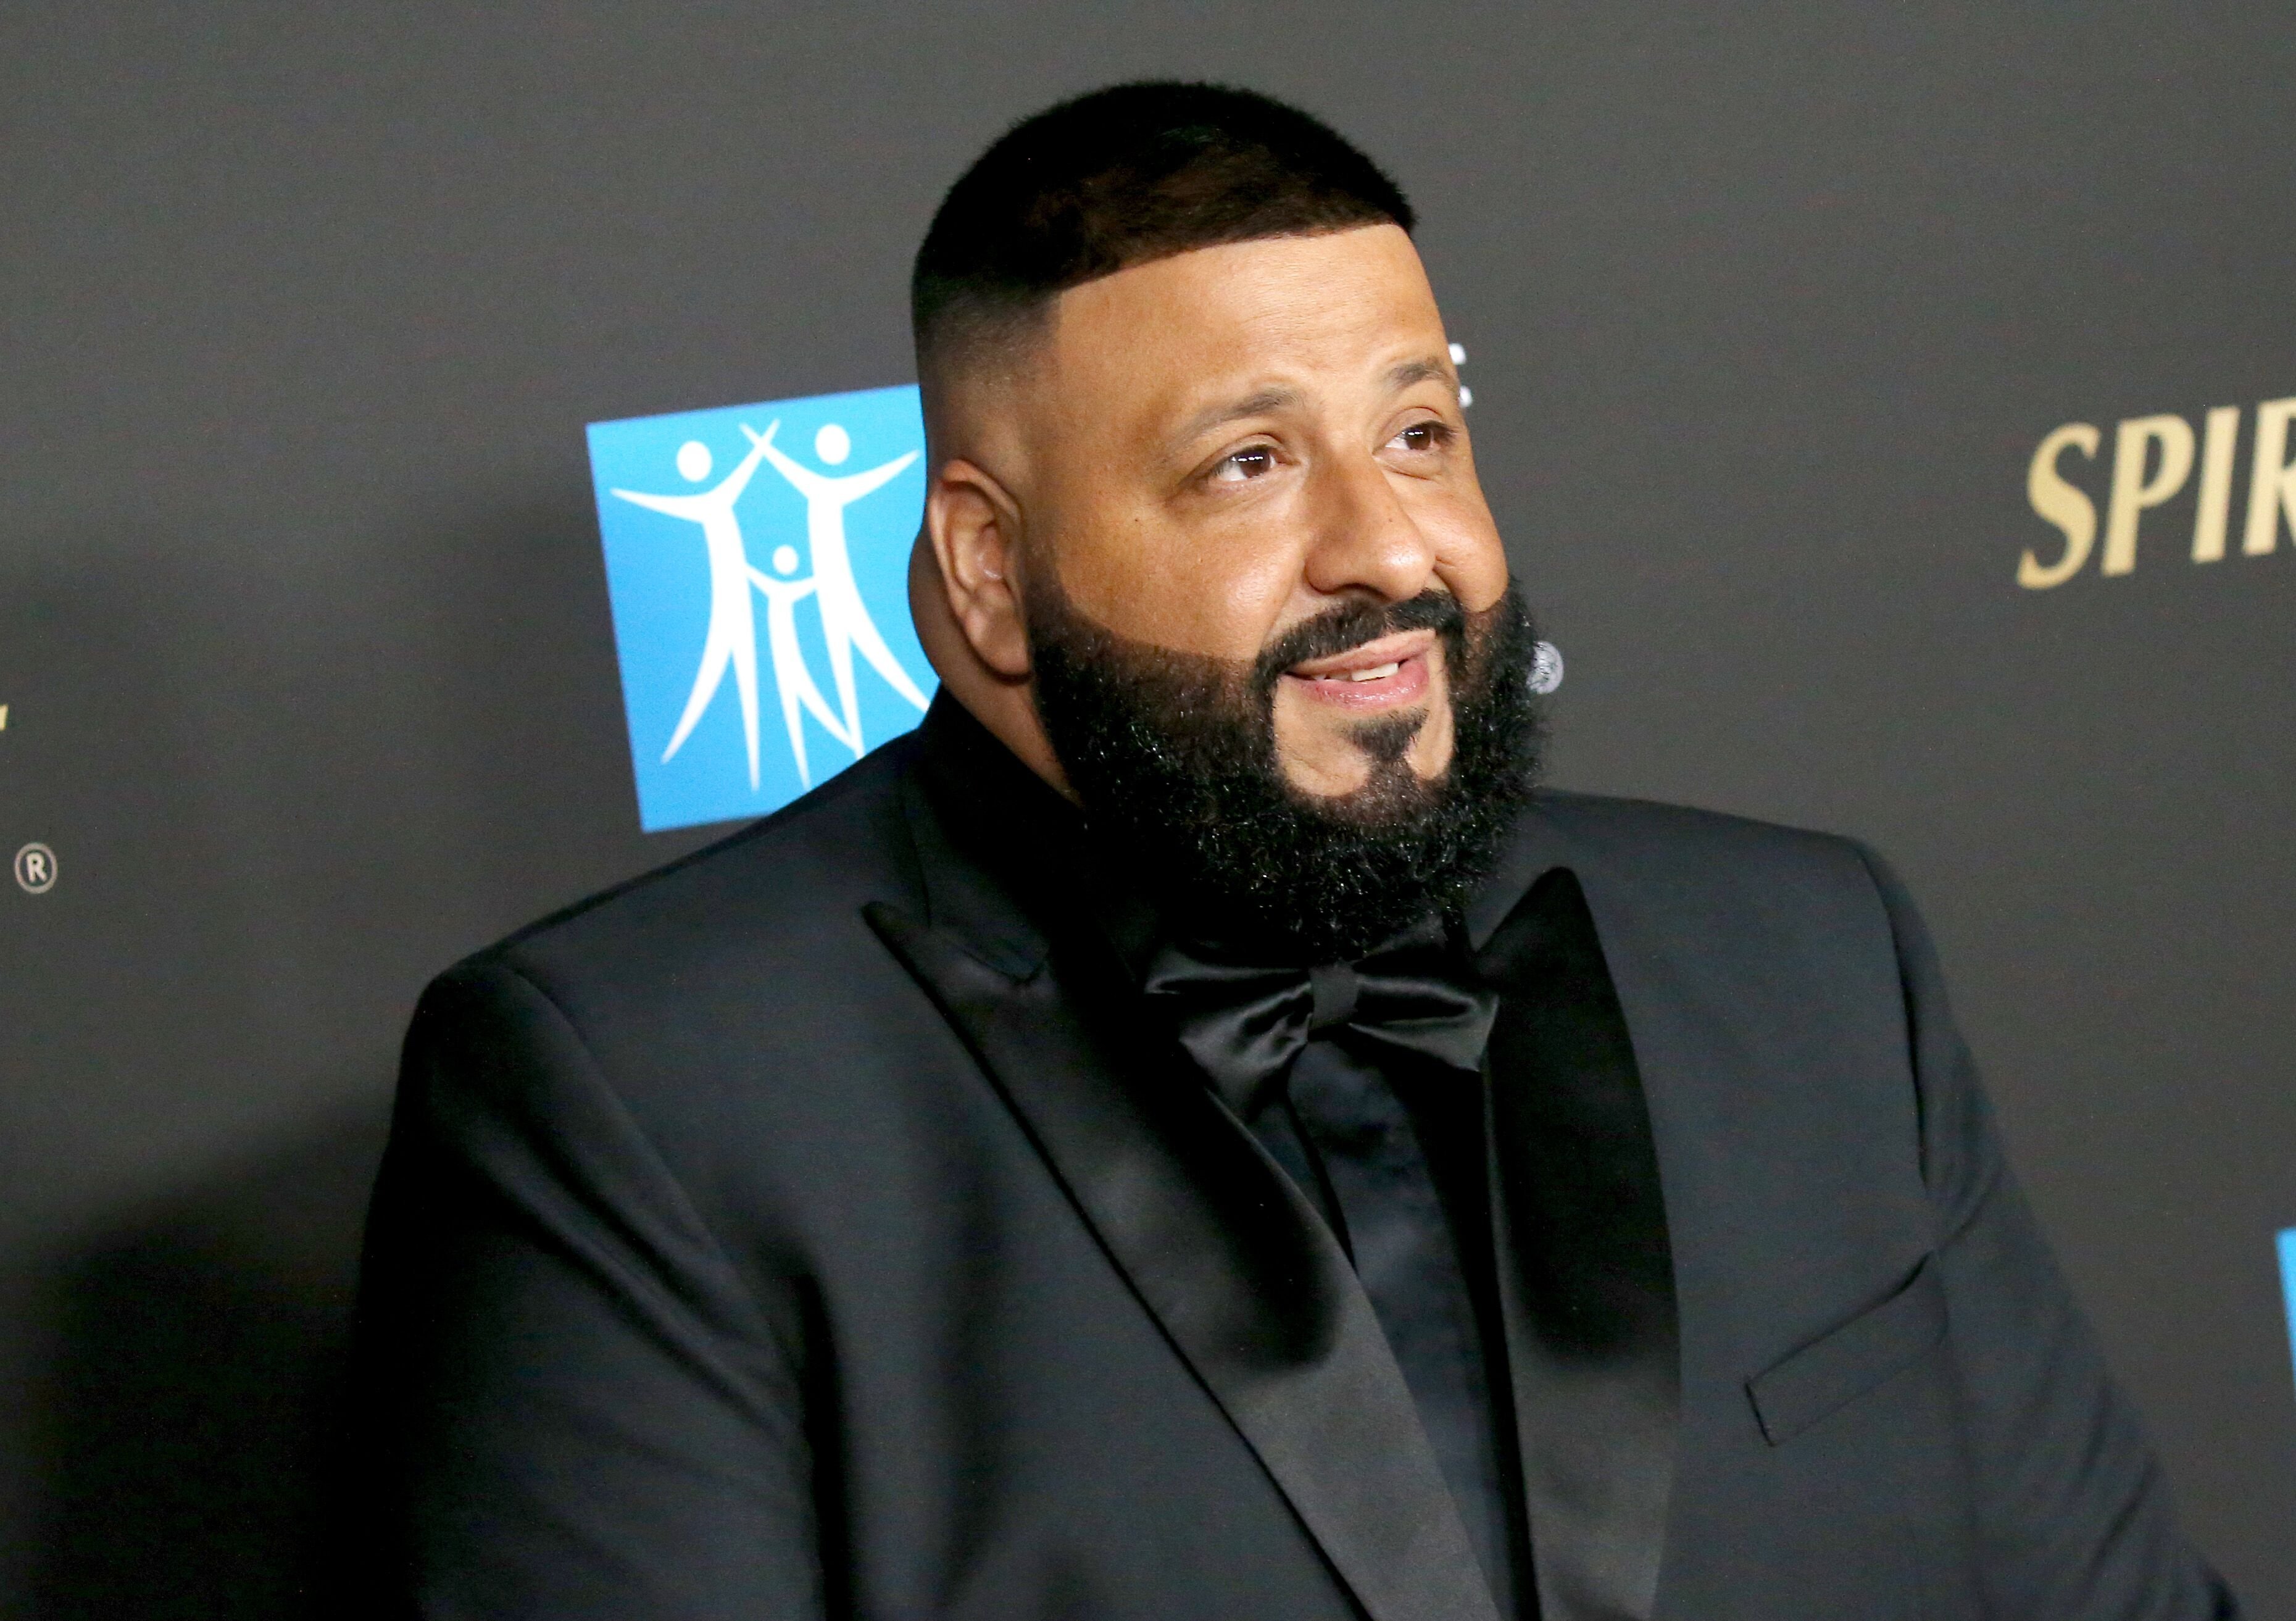 DJ Khaled attends the City Of Hope's Spirit of Life 2019 Gala held at The Barker Hanger on October 10, 2019 in Santa Monica, California | Photo: Getty Images